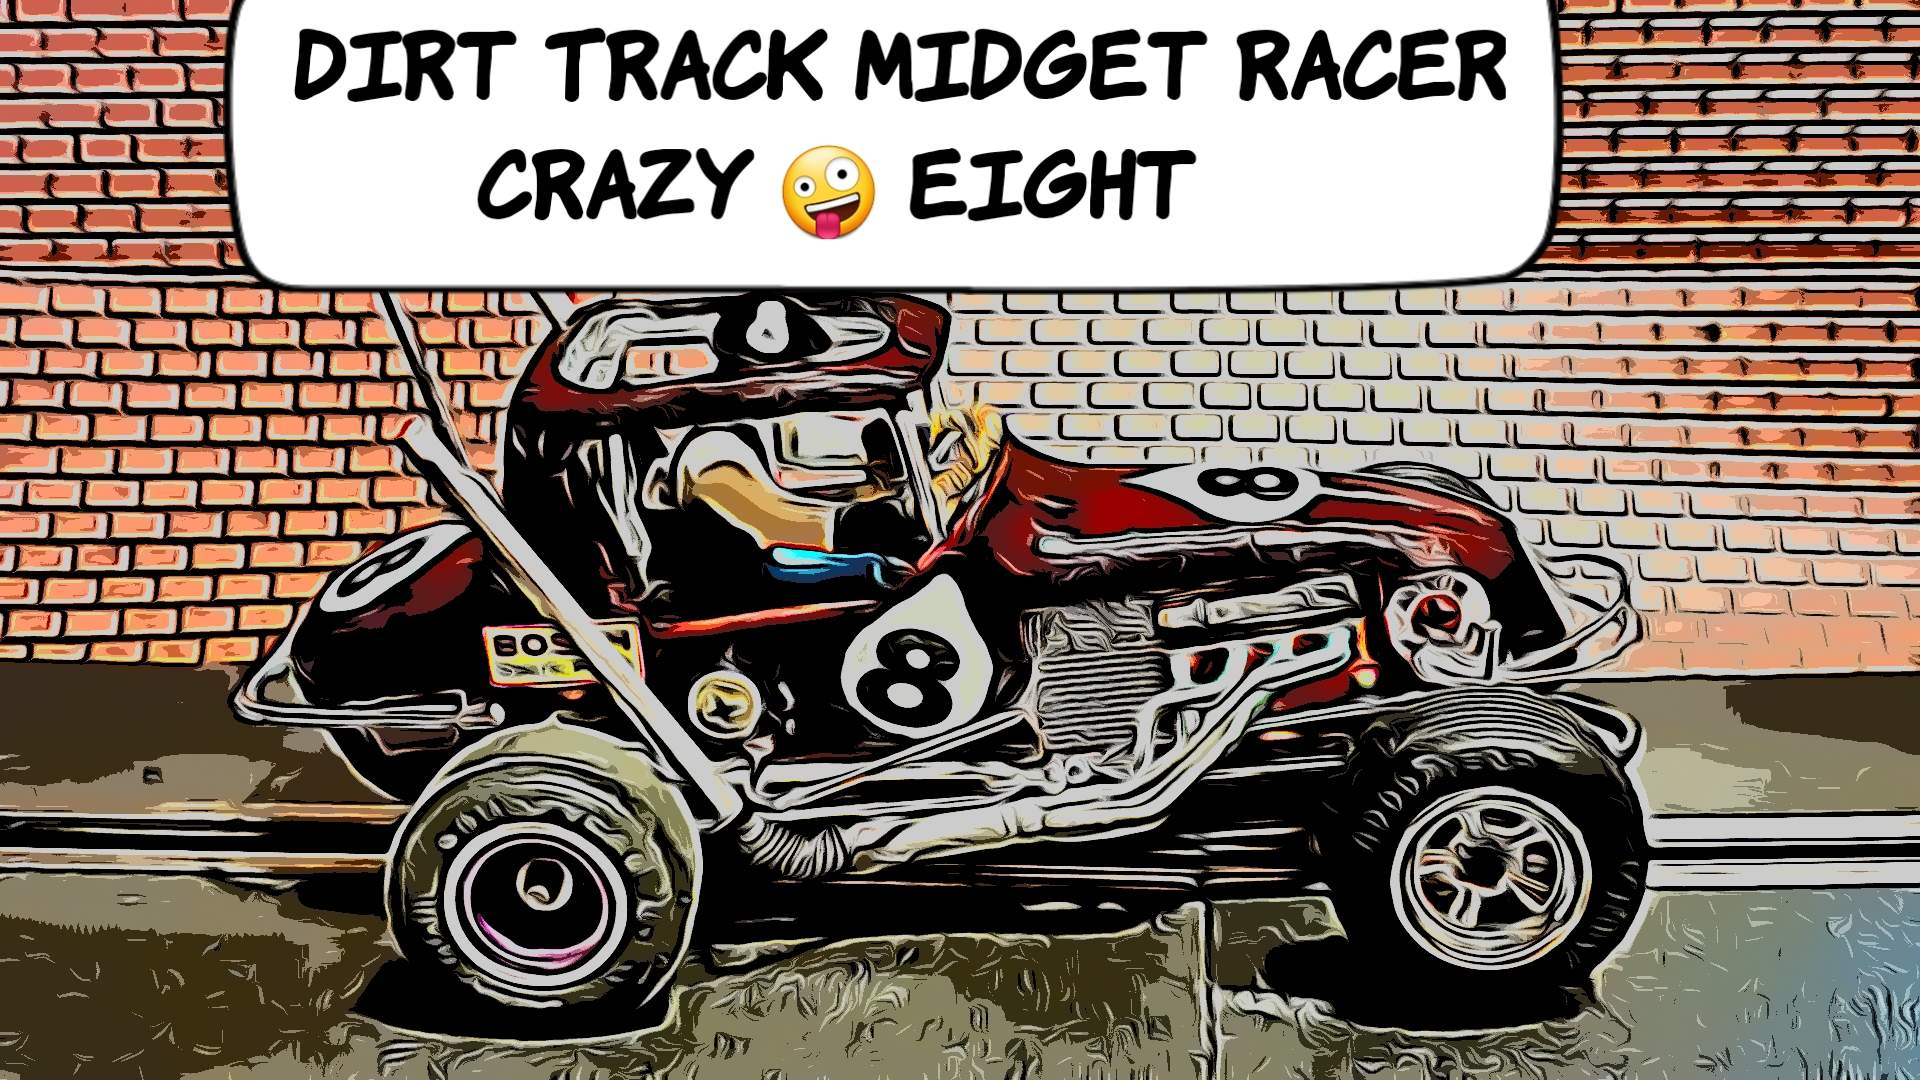 Sprint Cup Style * THIS WEEKEND ONLY * Black Friday Super Sale, Save $145 off our Ebay $369.99 Store Sale Price * Monogram Dirt Track Midget Racing Special Slot Car 1/24 Scale Car – Crazy 🤪 8 🤪